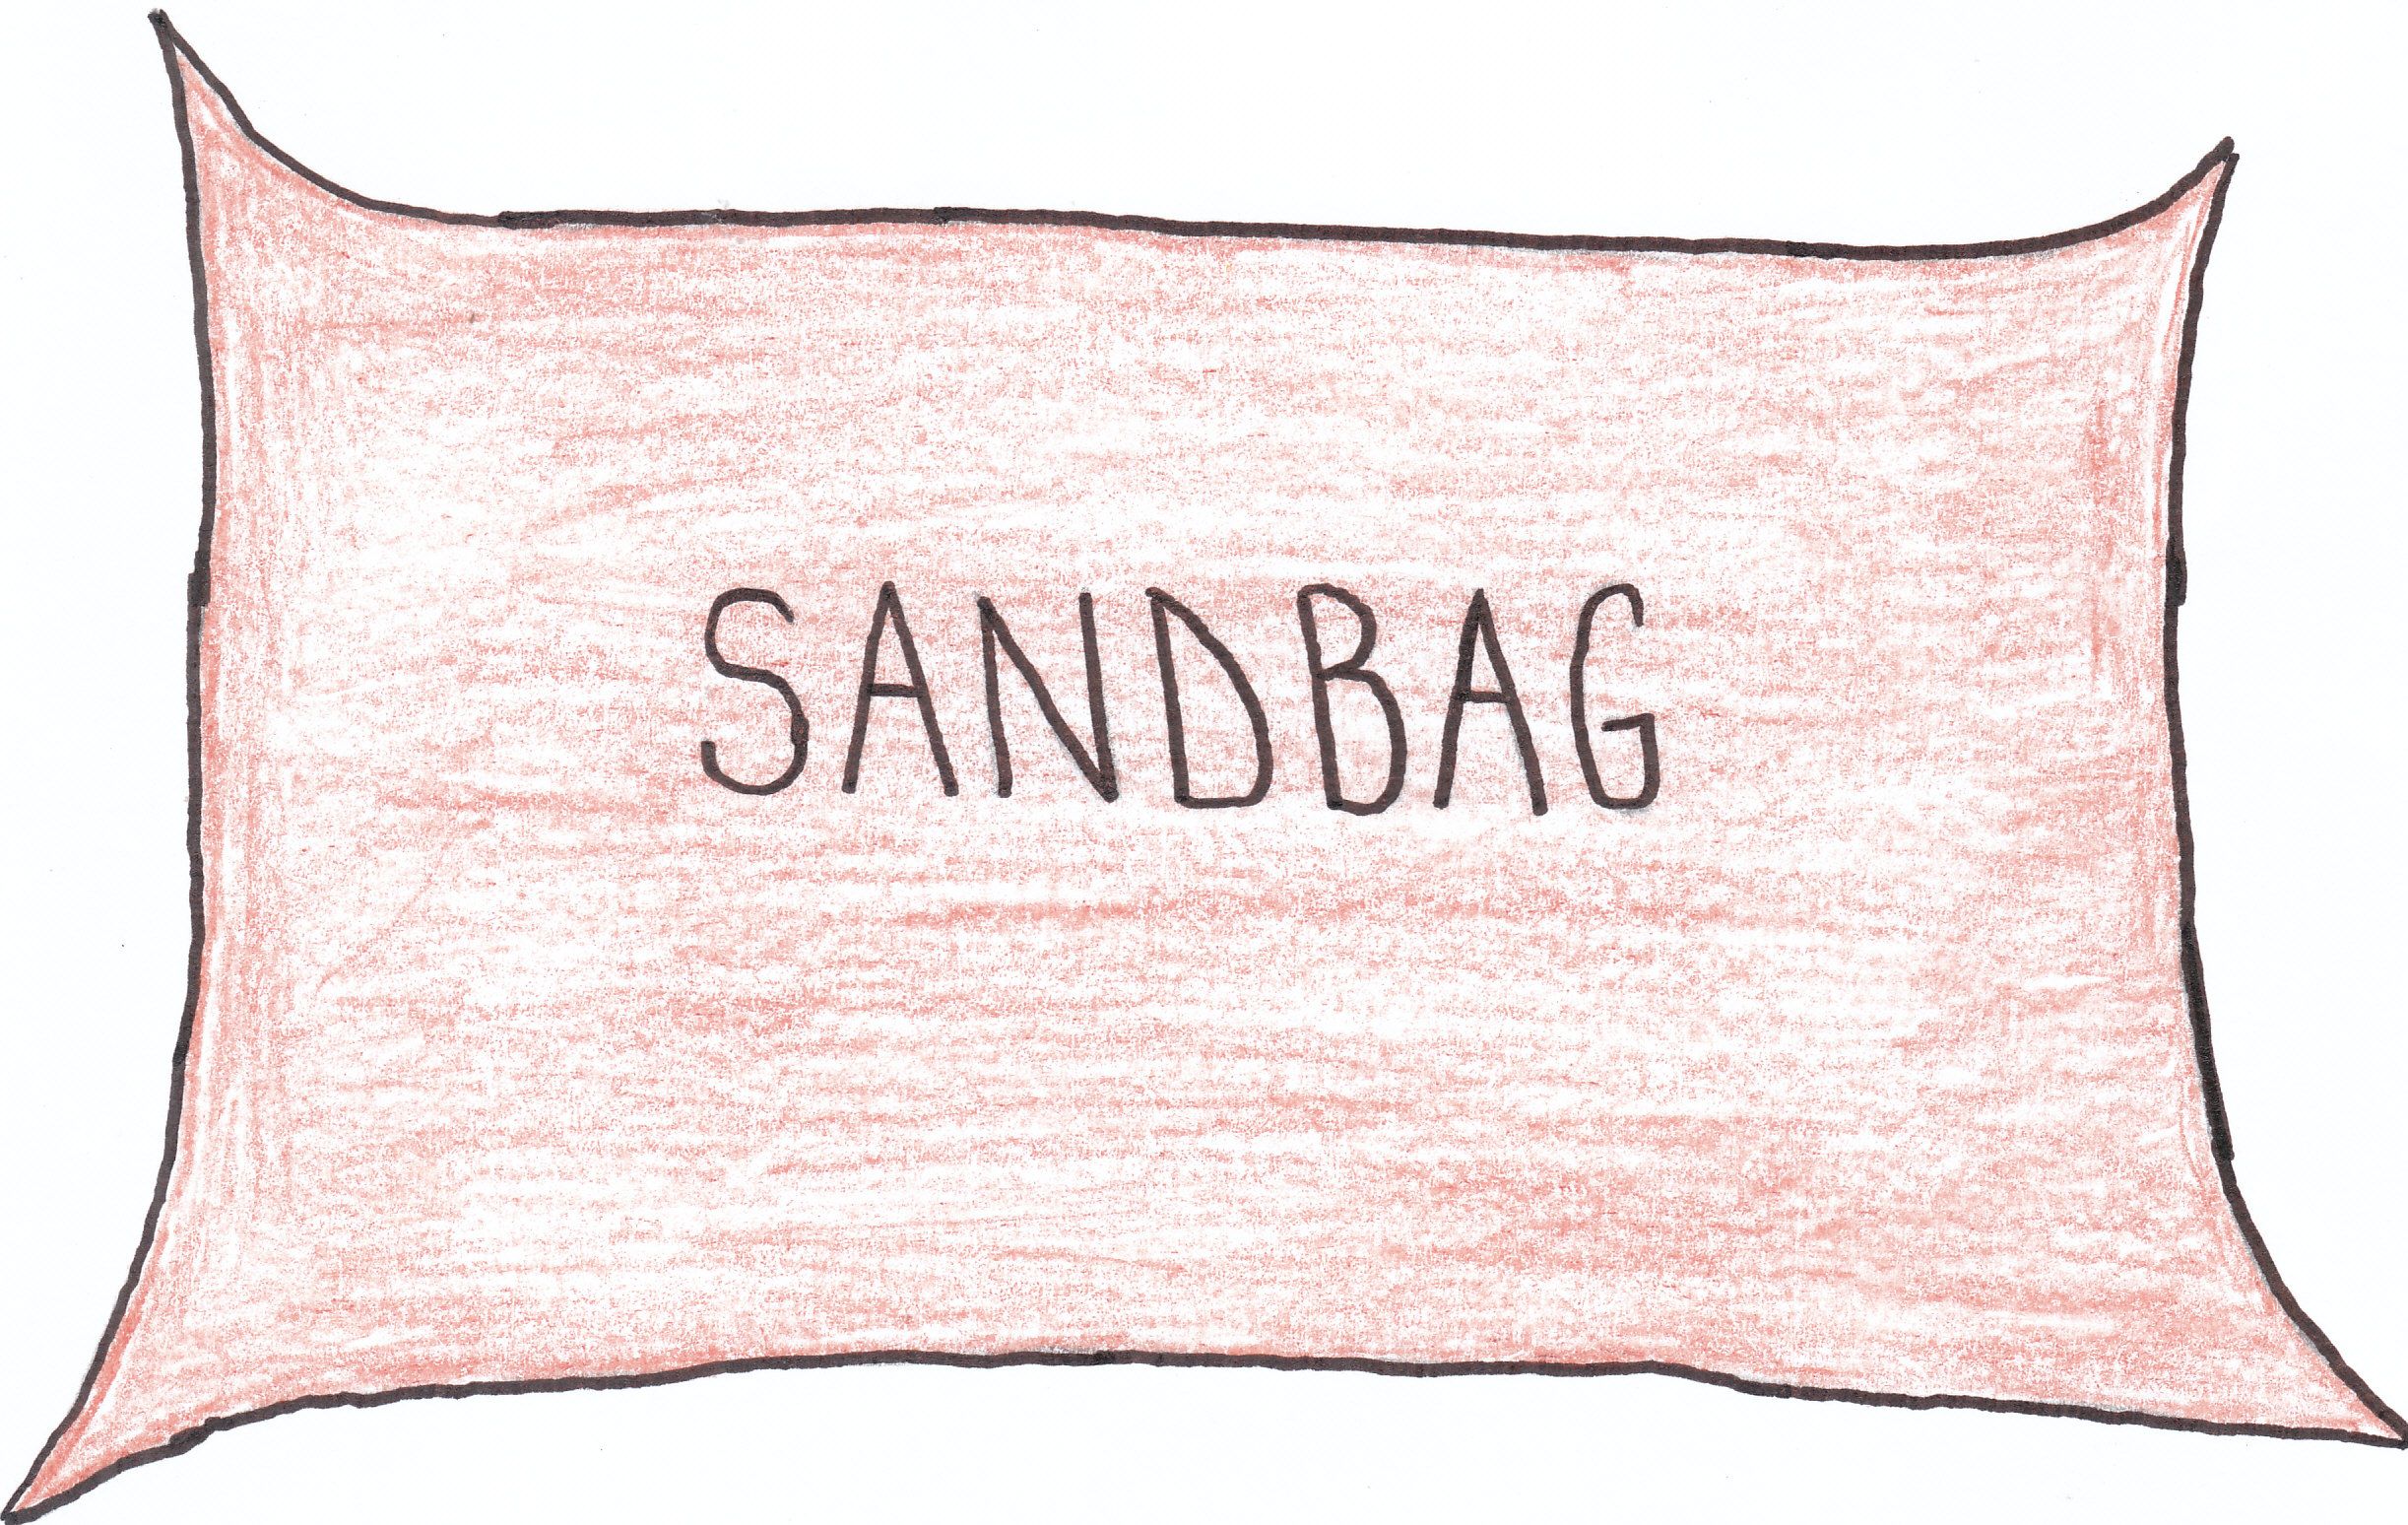 Overtricks in Spades are called bags or Sandbags